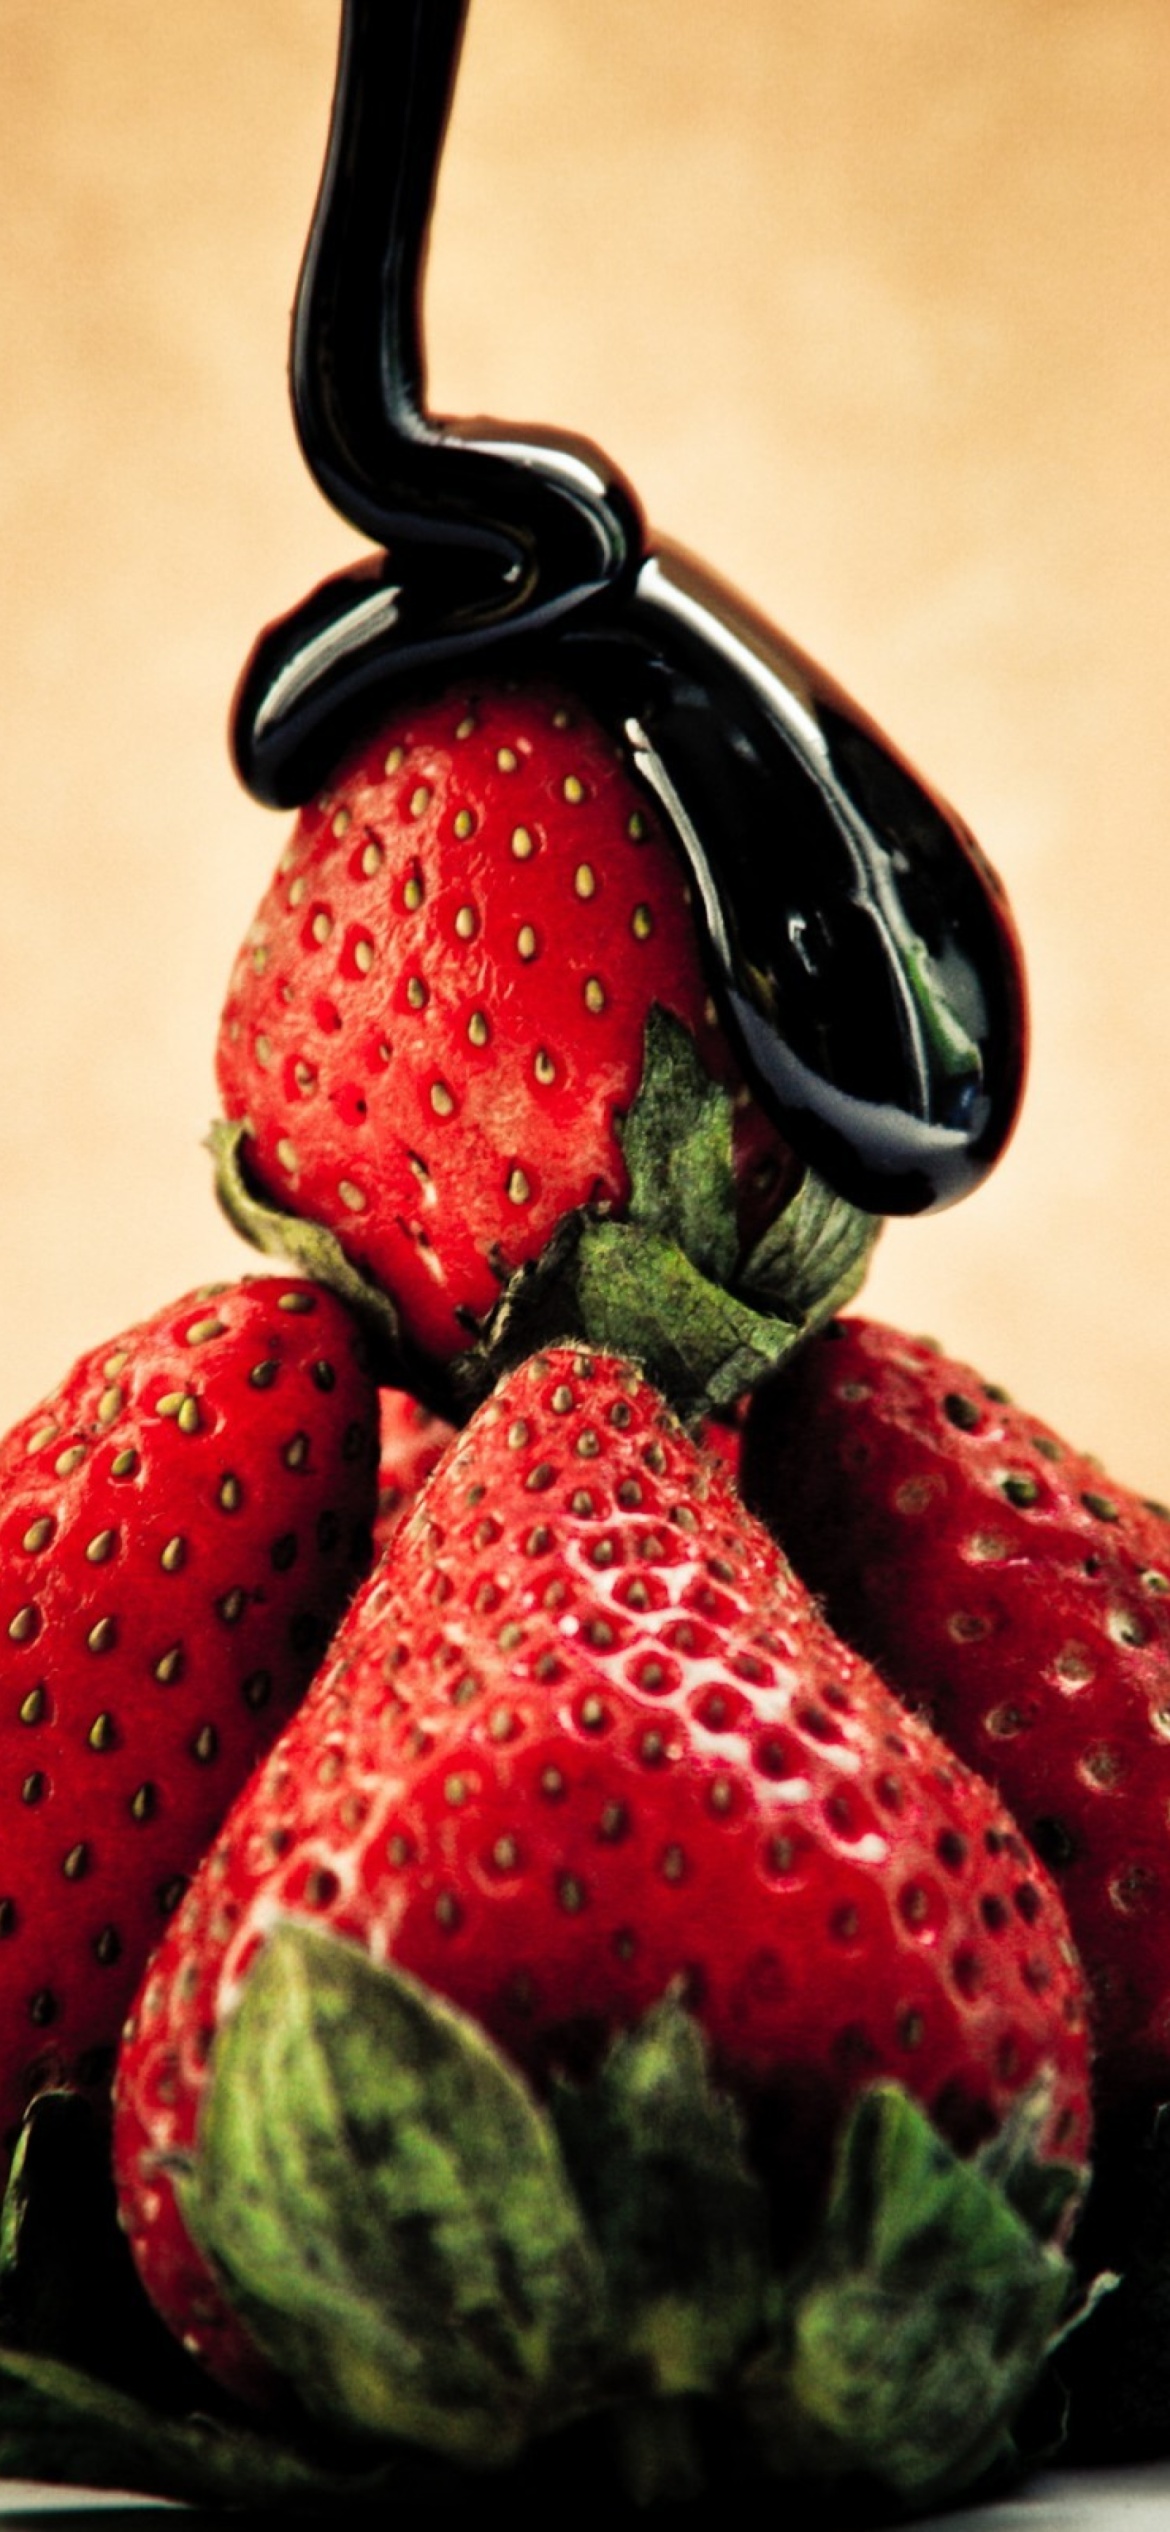 Strawberries with chocolate wallpaper 1170x2532